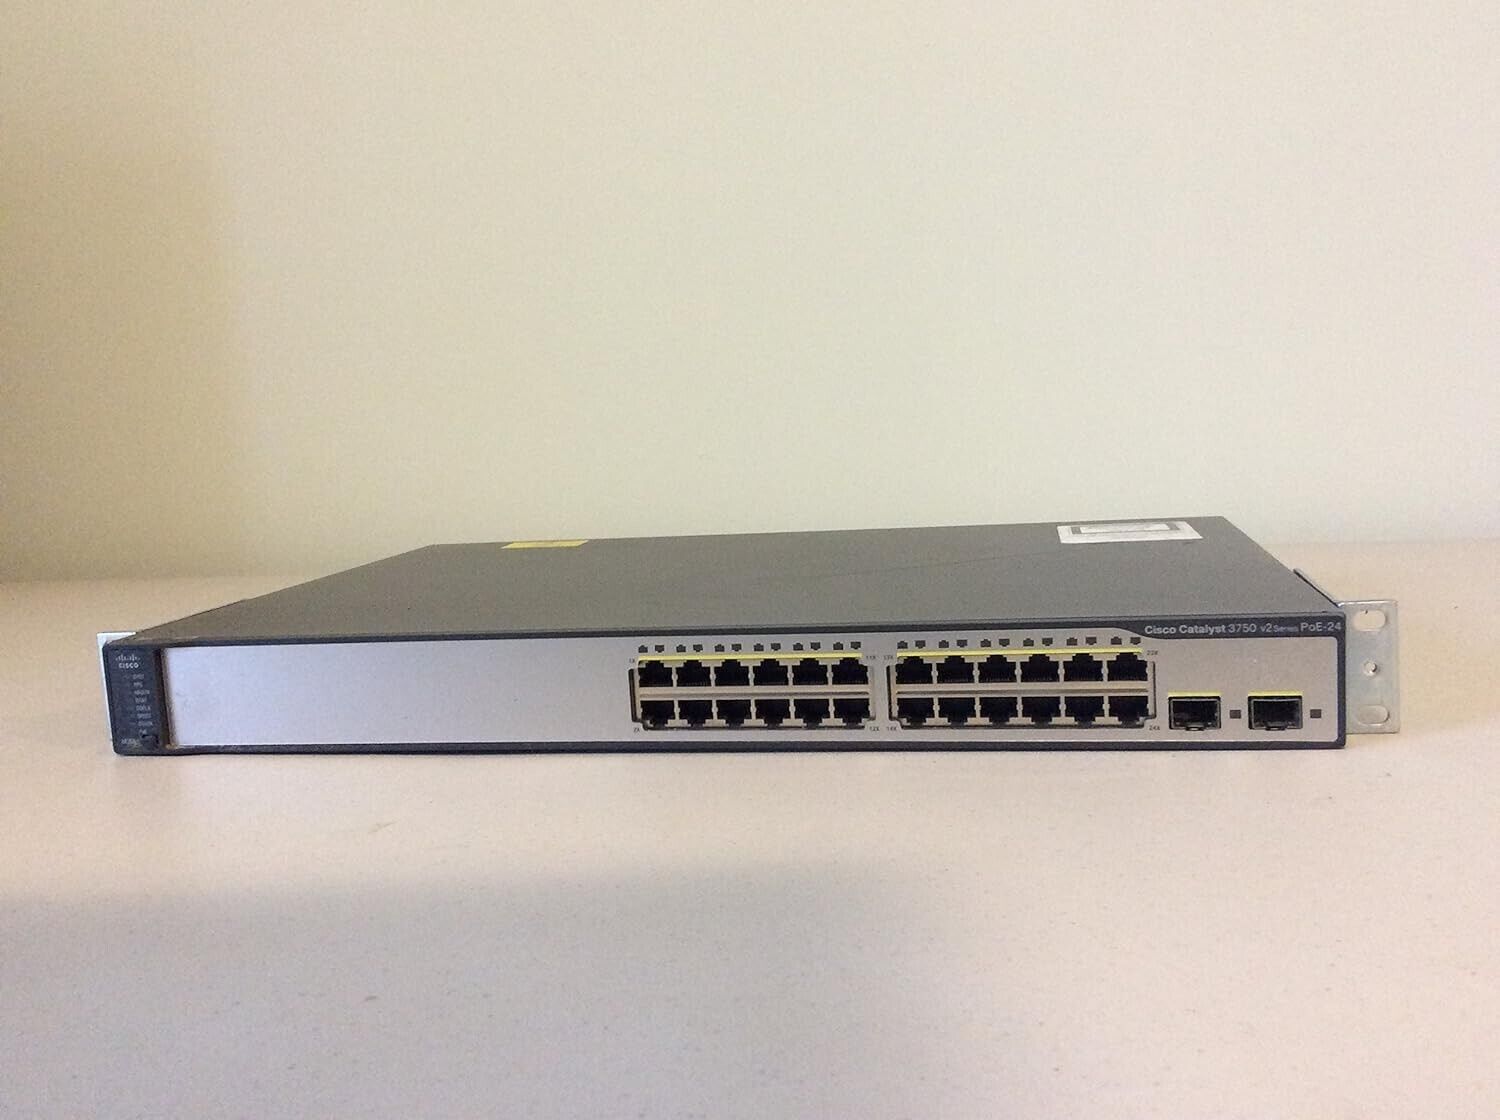 Cisco WS-C3750V2-24PS-S 24-Port PoE+ Stackable Managed Ethernet Switch